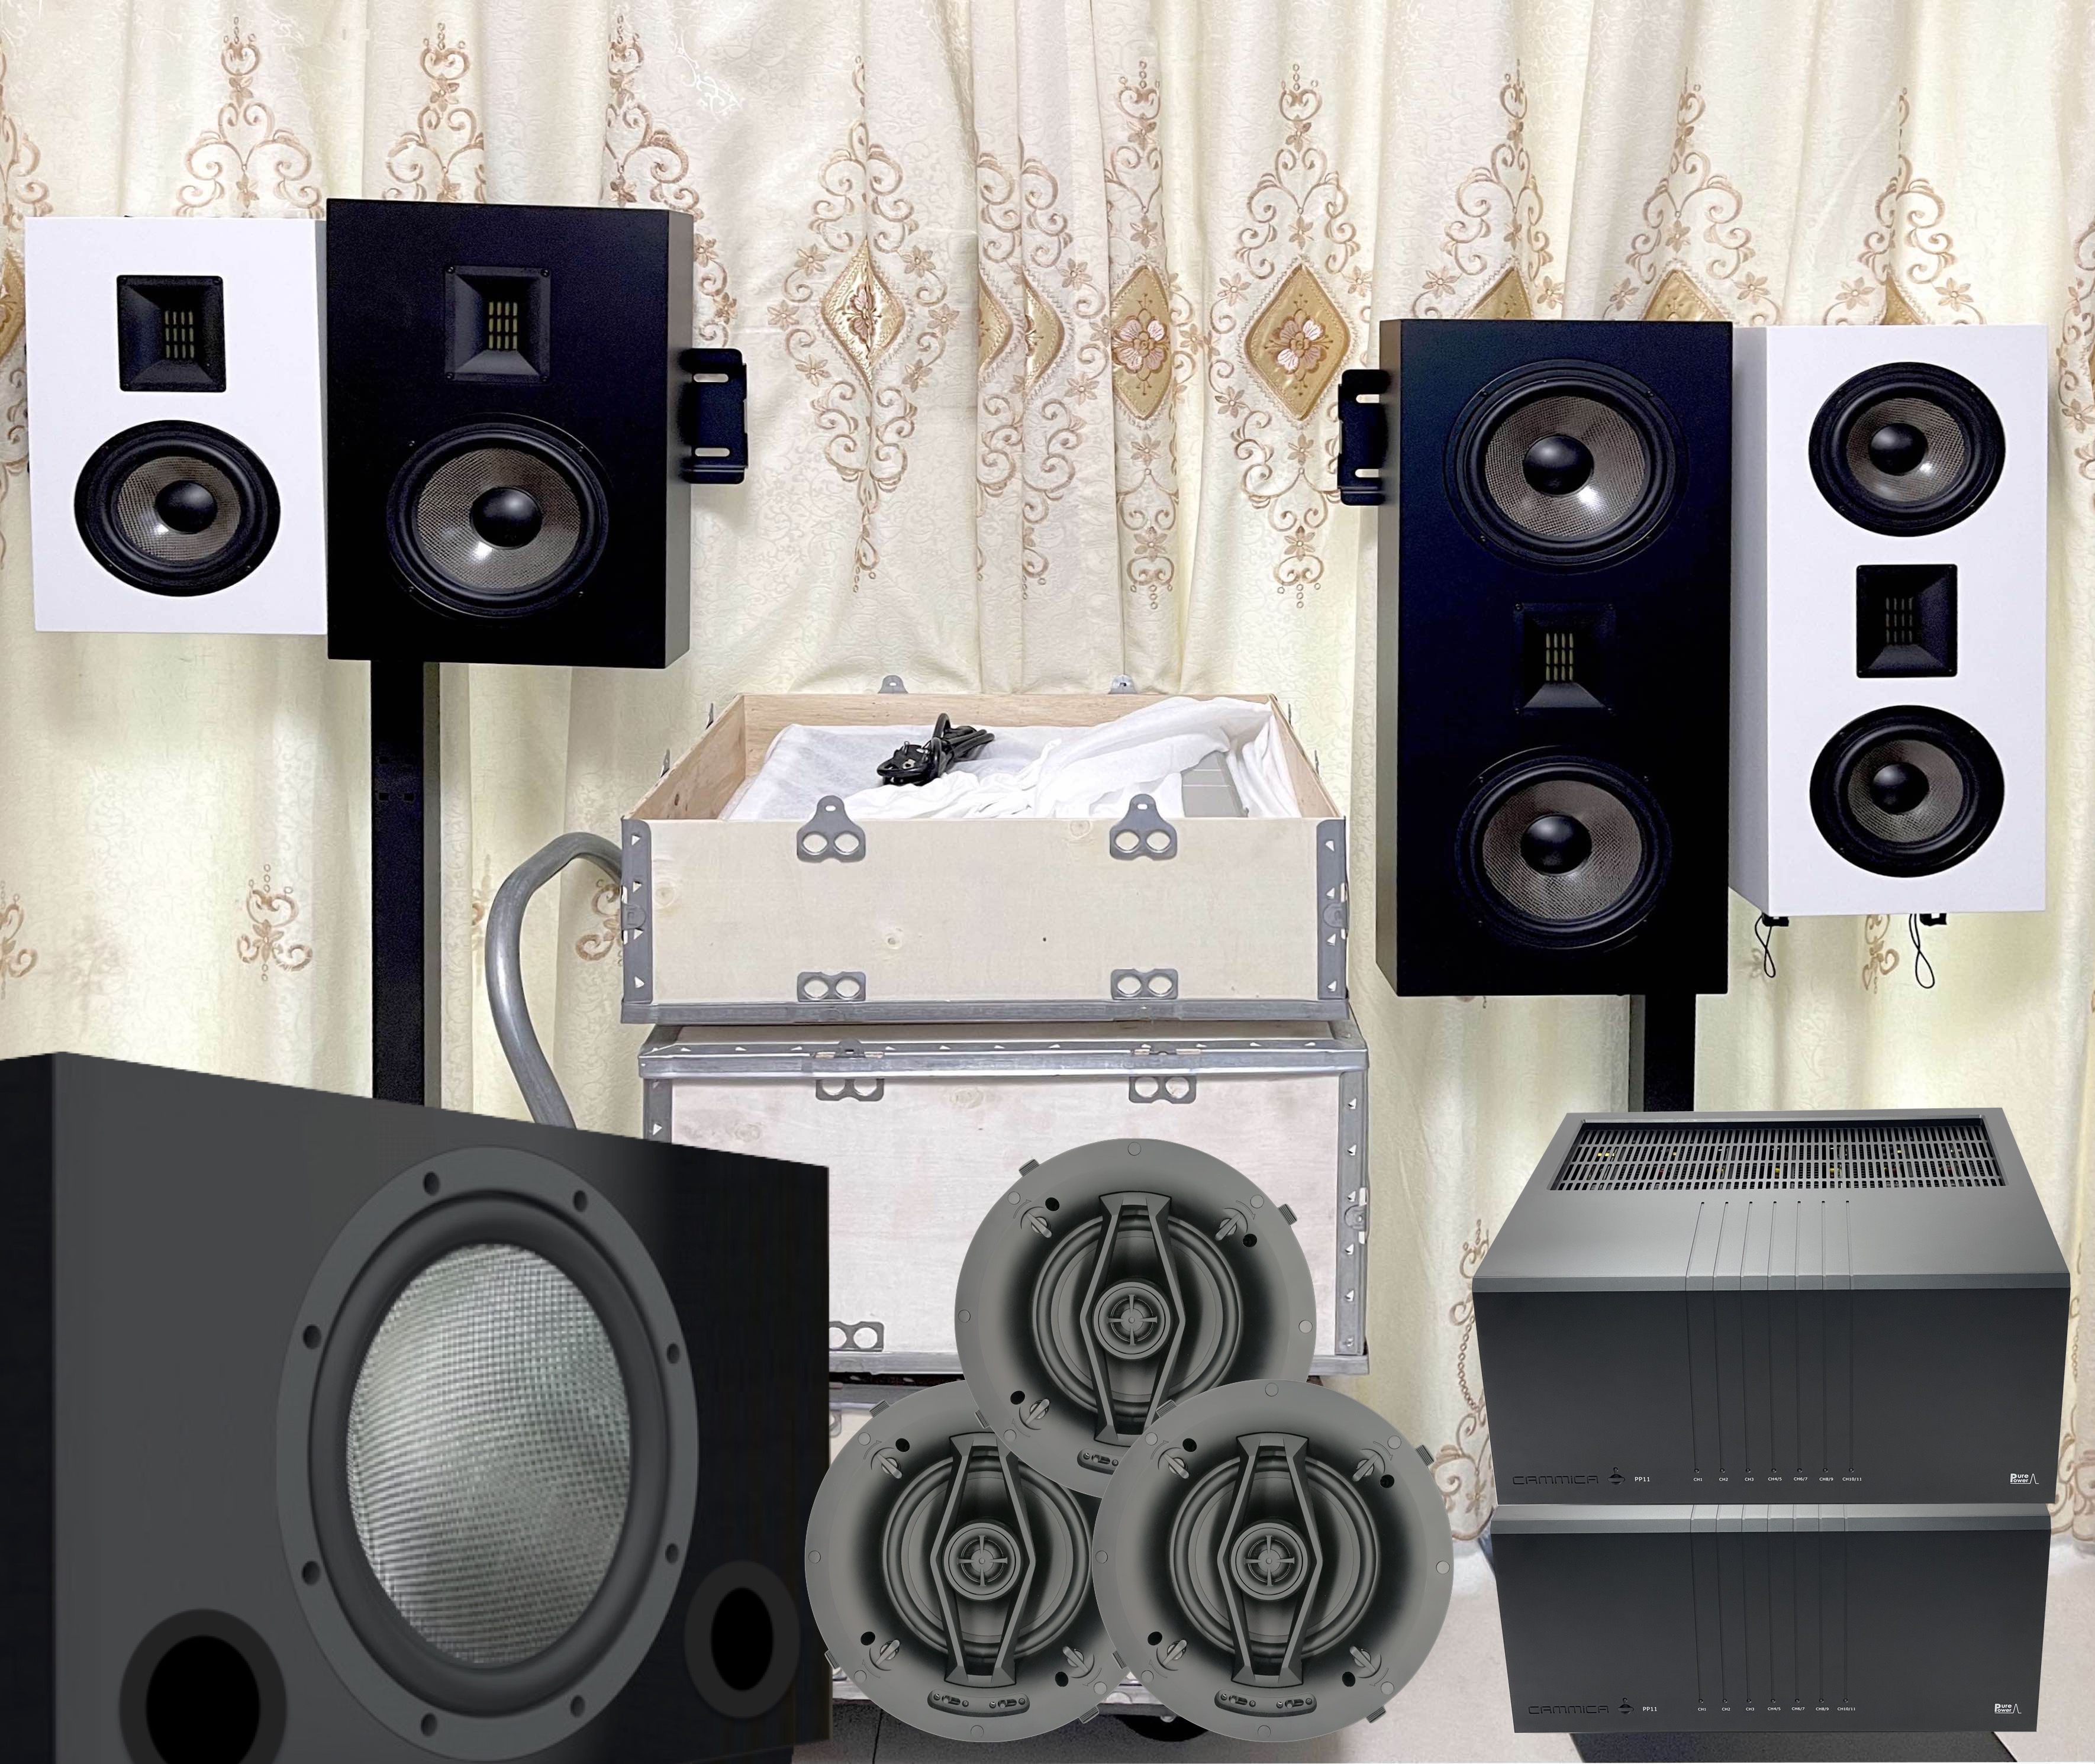 Do you know all the four common surround sound processing systems in home theaters?